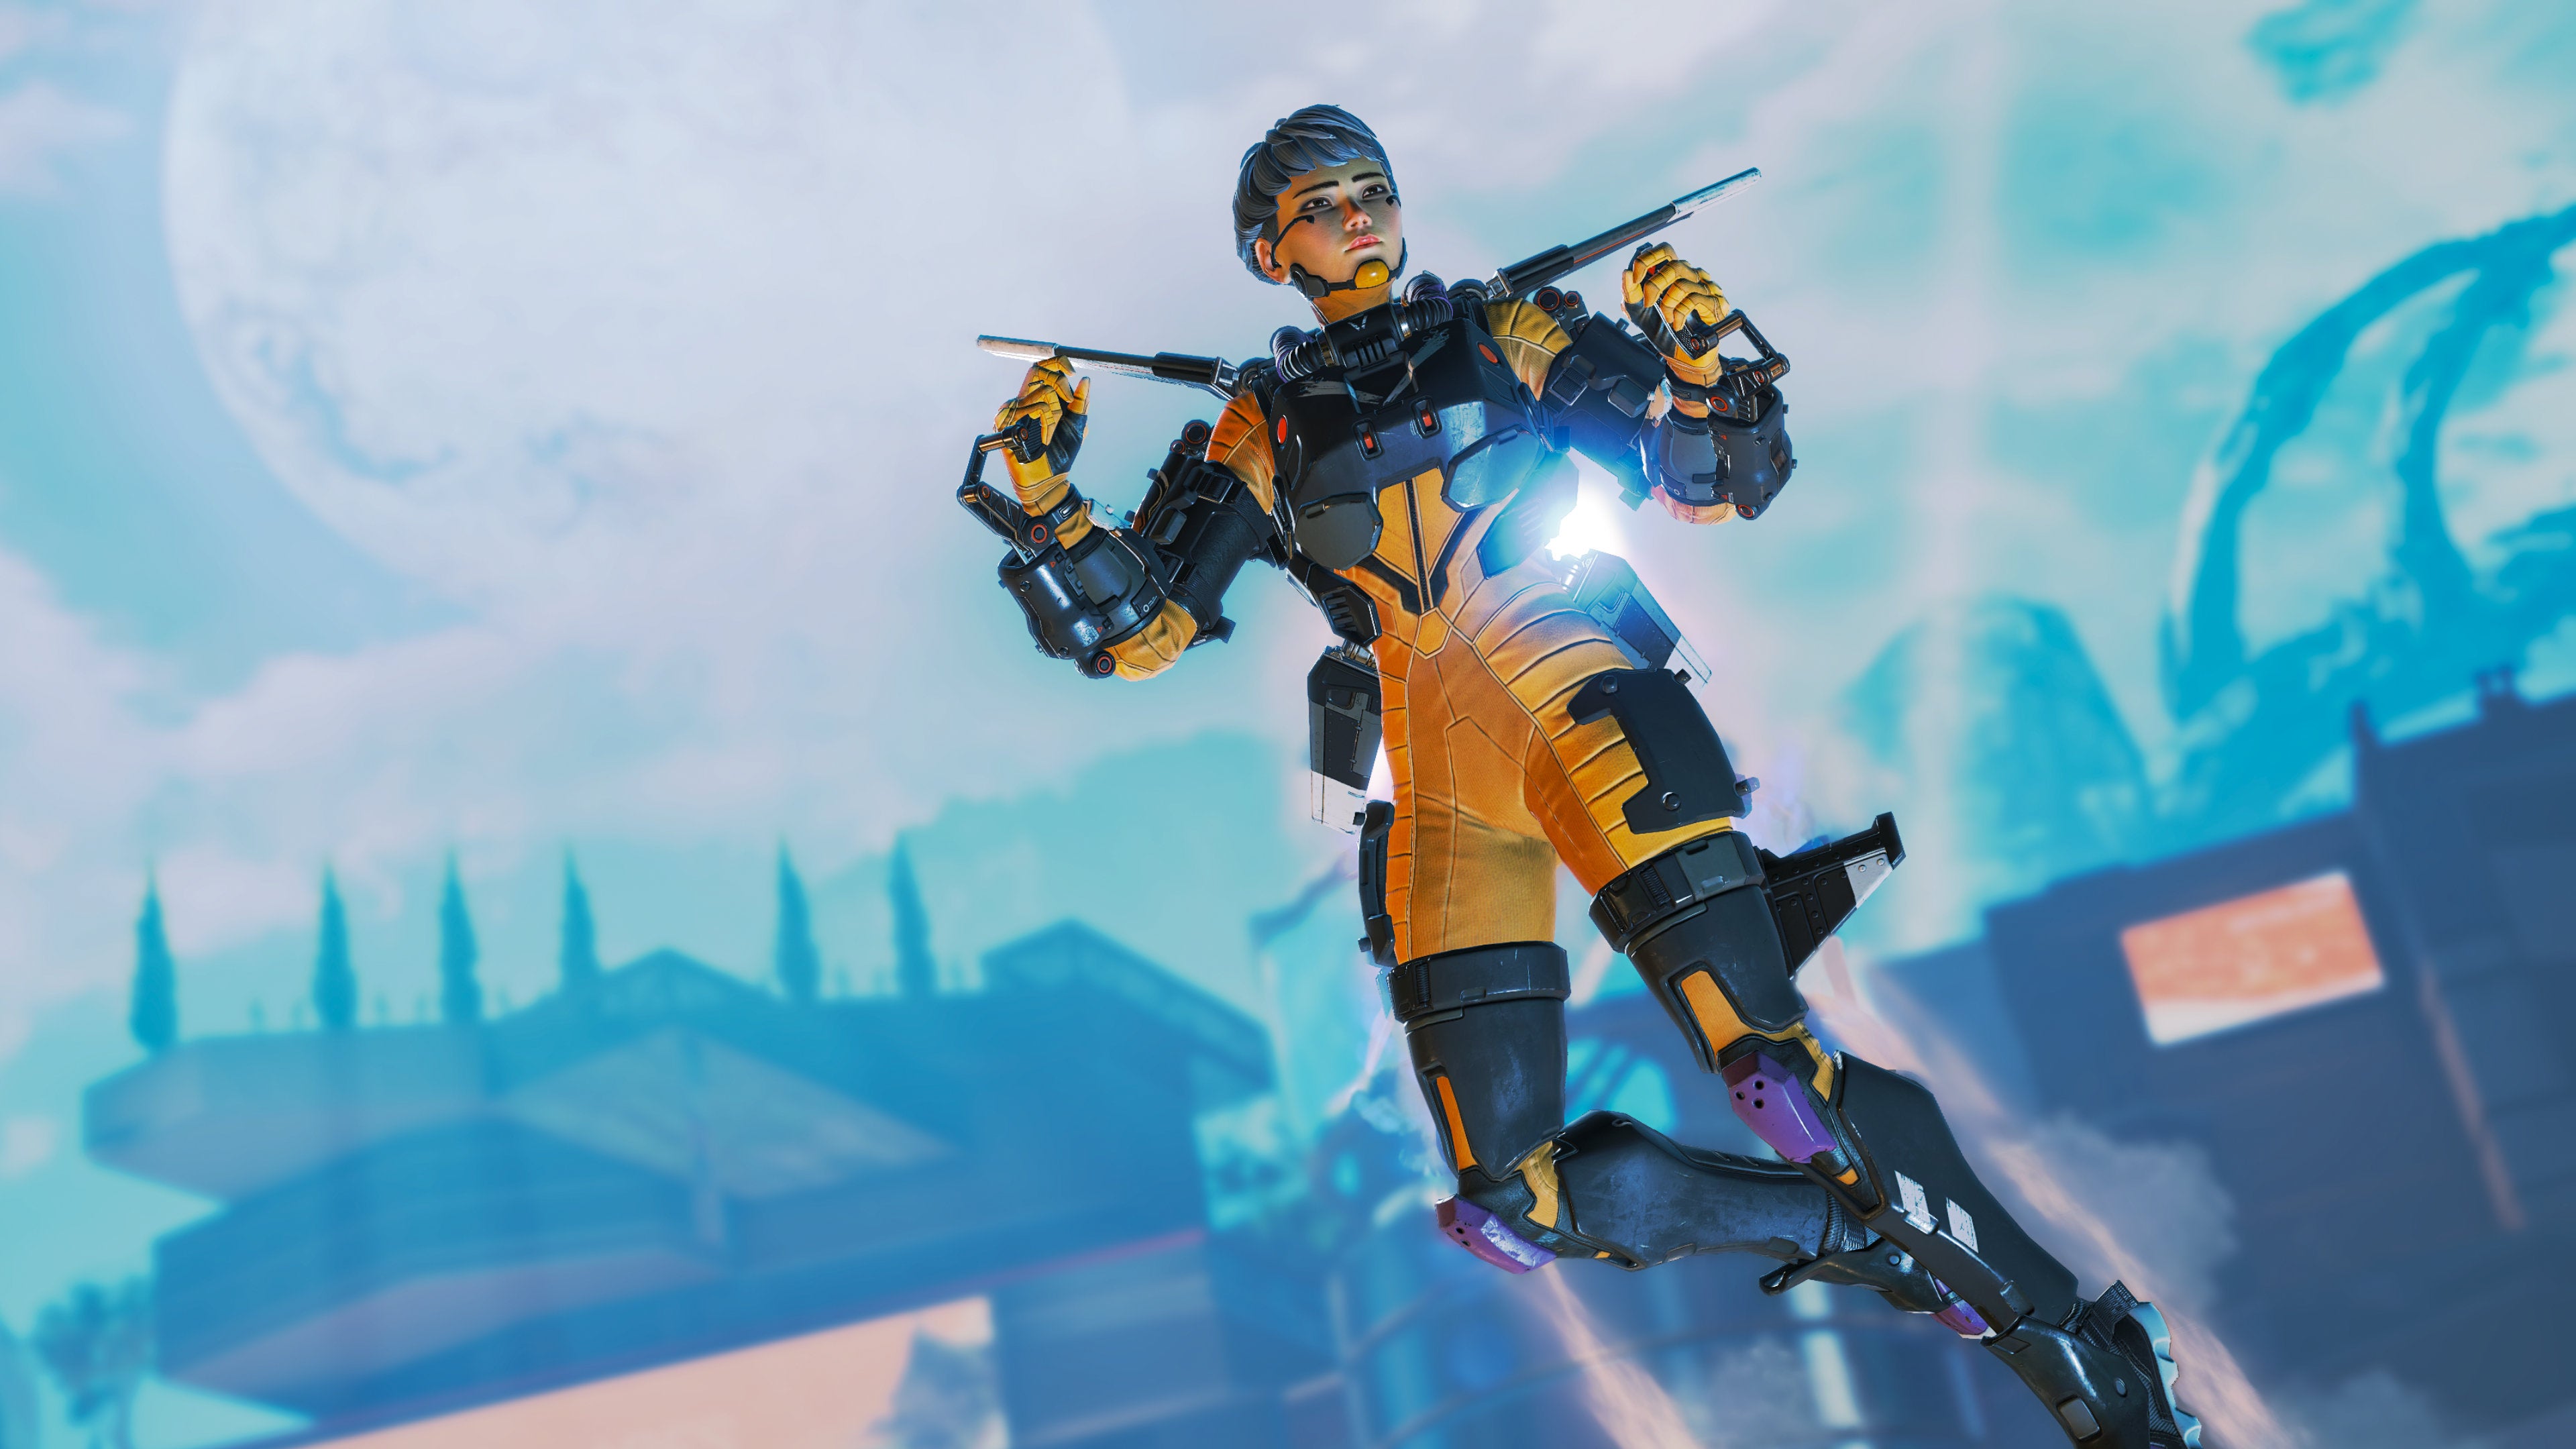 Promotional Apex Legends screenshot of Valkyrie hovering high in the air with her jetpack